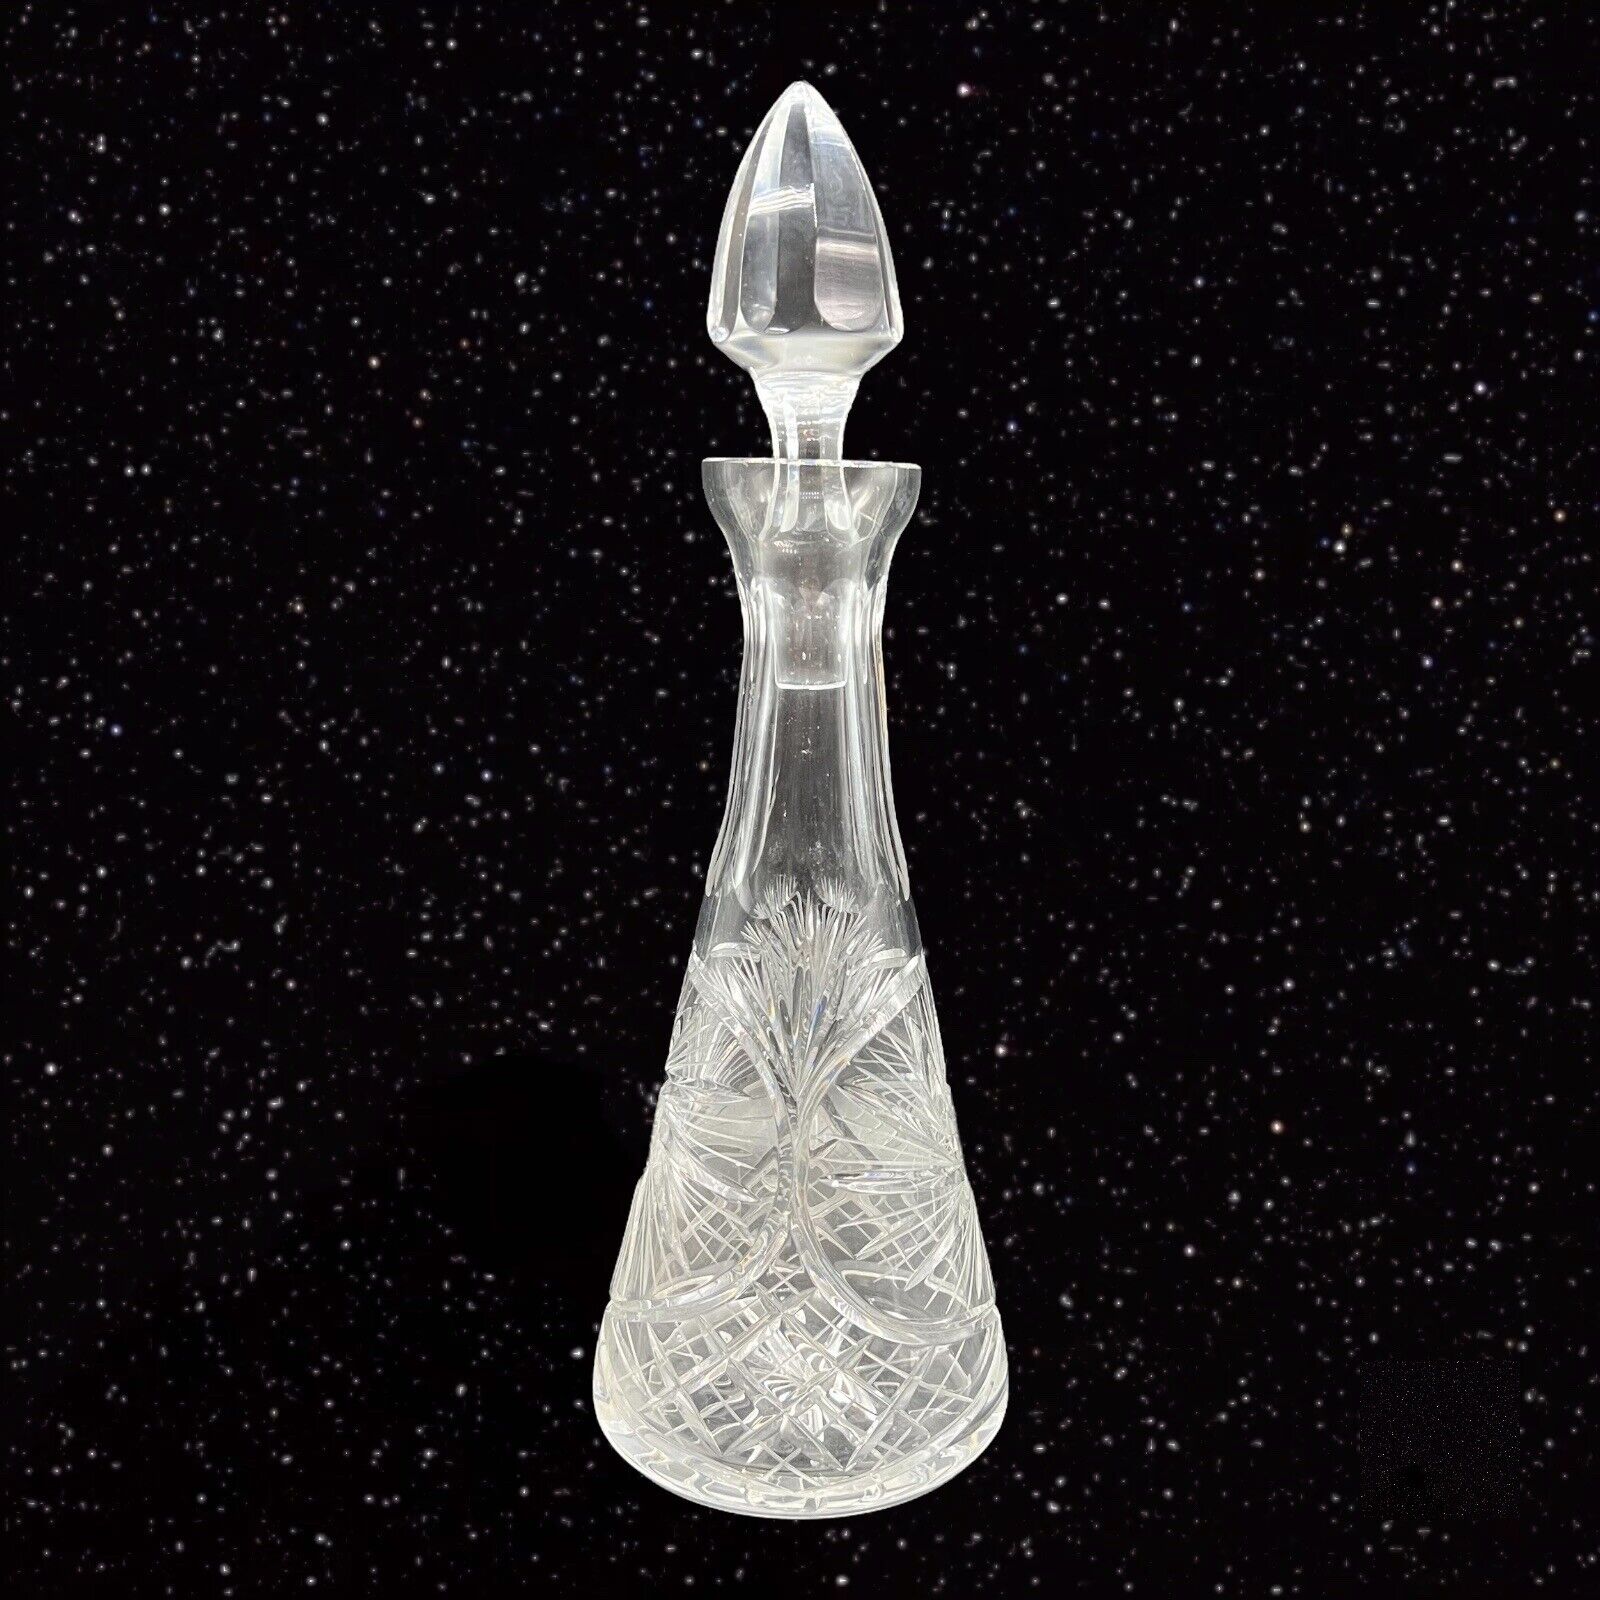 ETCHED ROHAN CRYSTAL DECANTER MADE IN FRANCE VINTAGE ART GLASS TALL 14.5”T 3”W